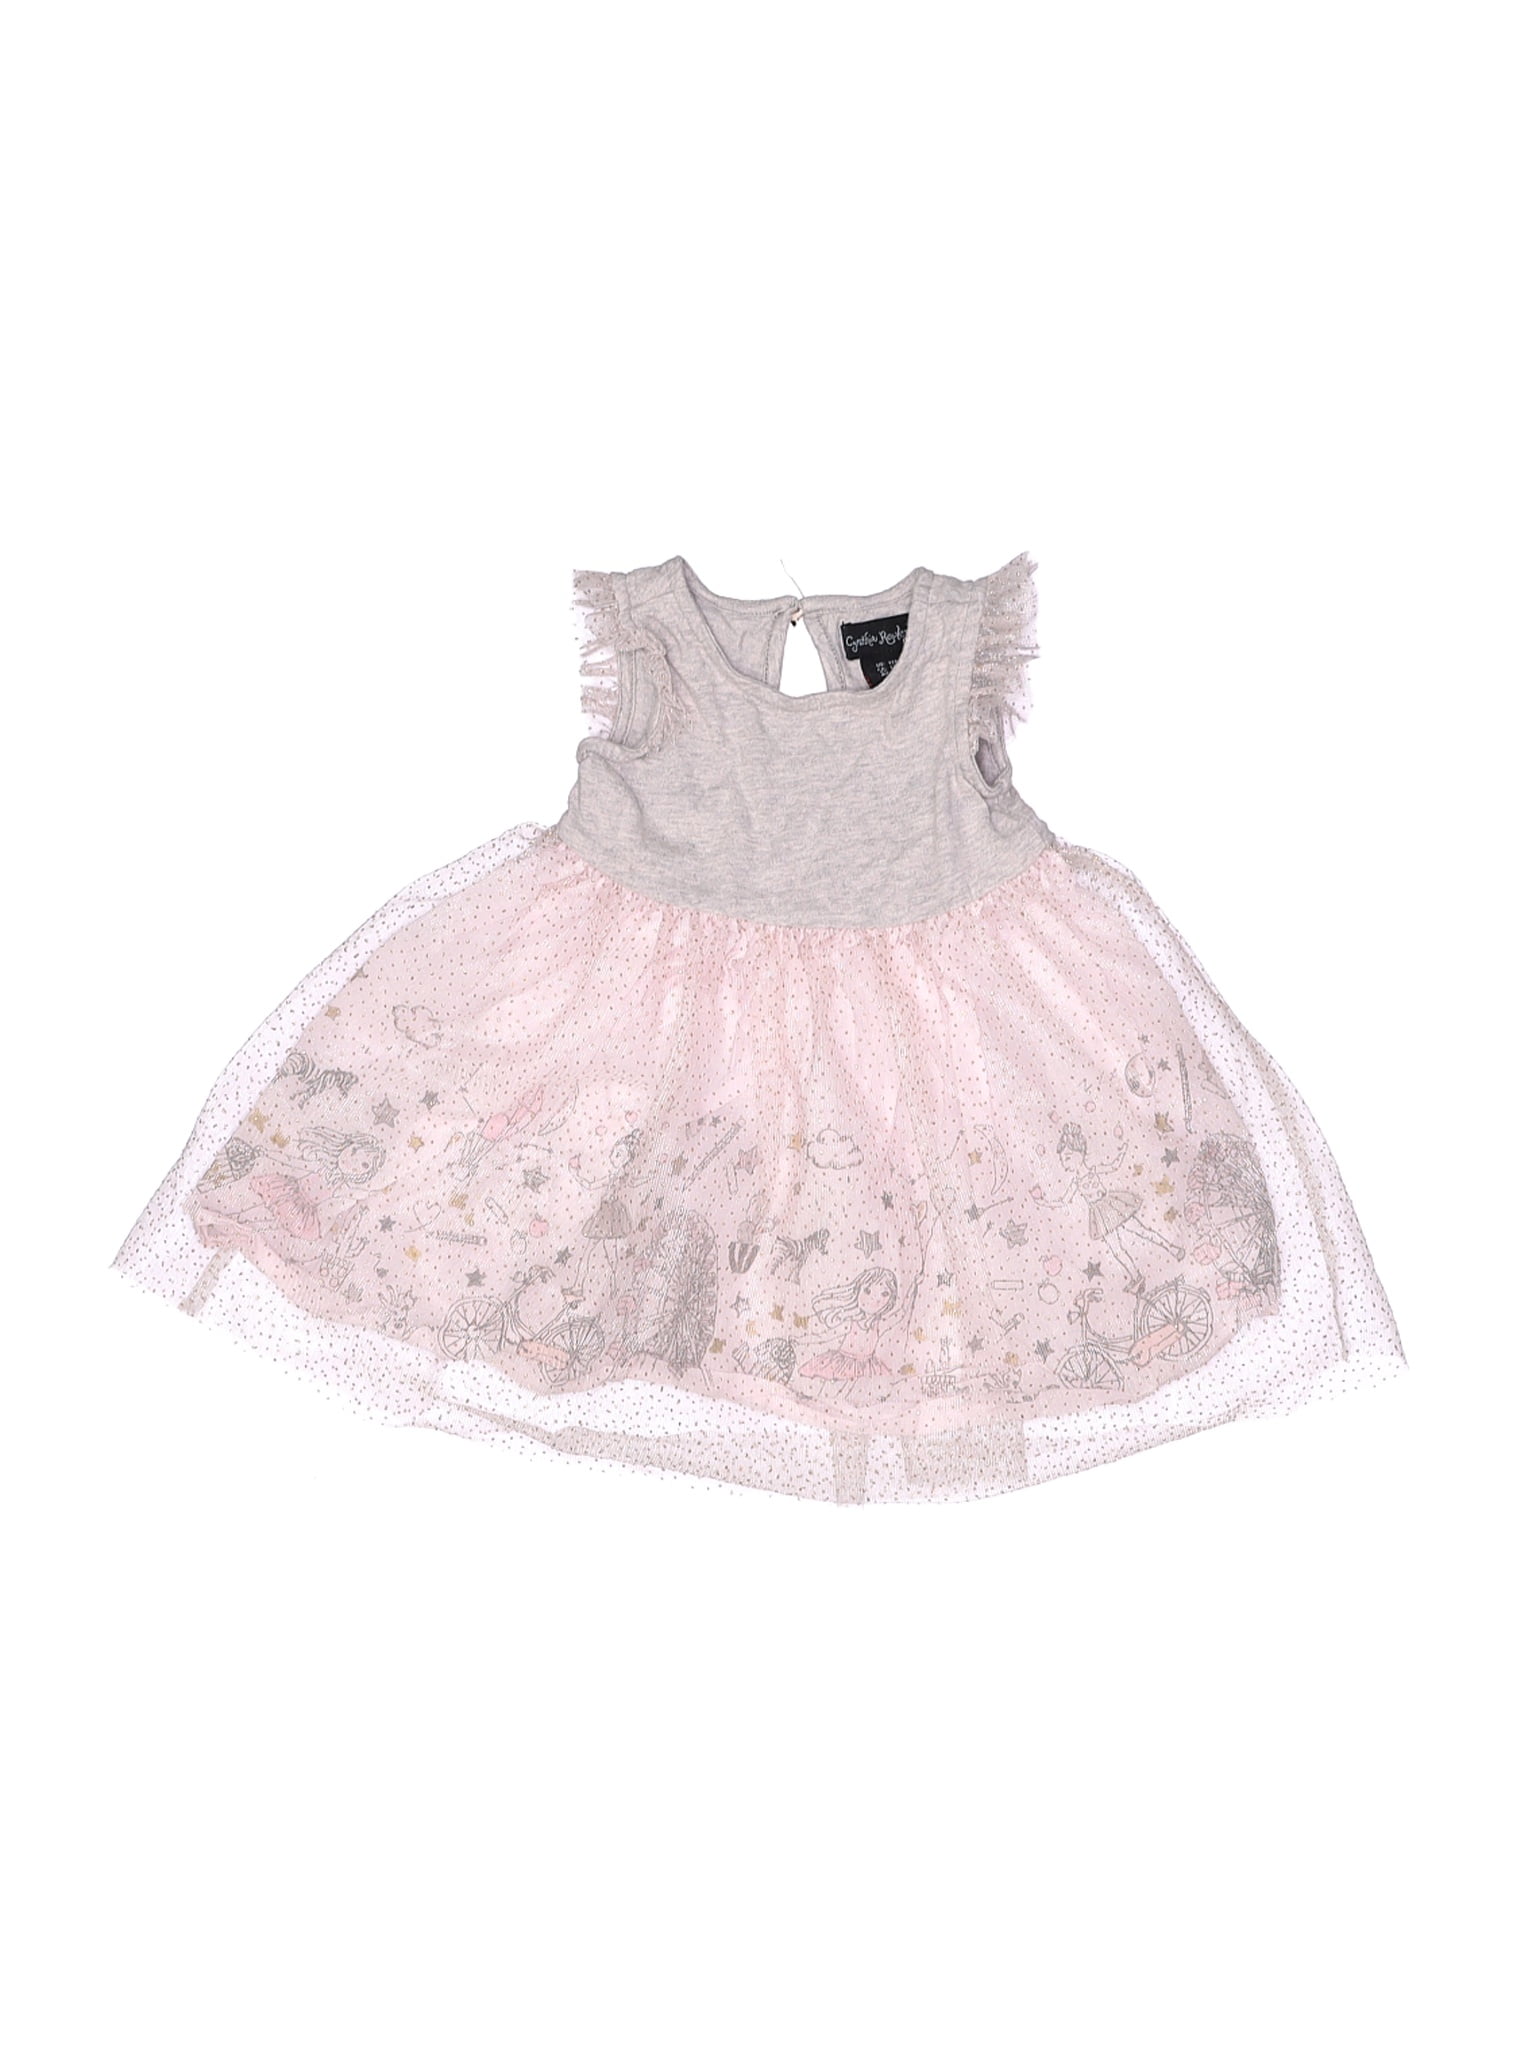 Buy > cynthia rowley girl clothes > in stock